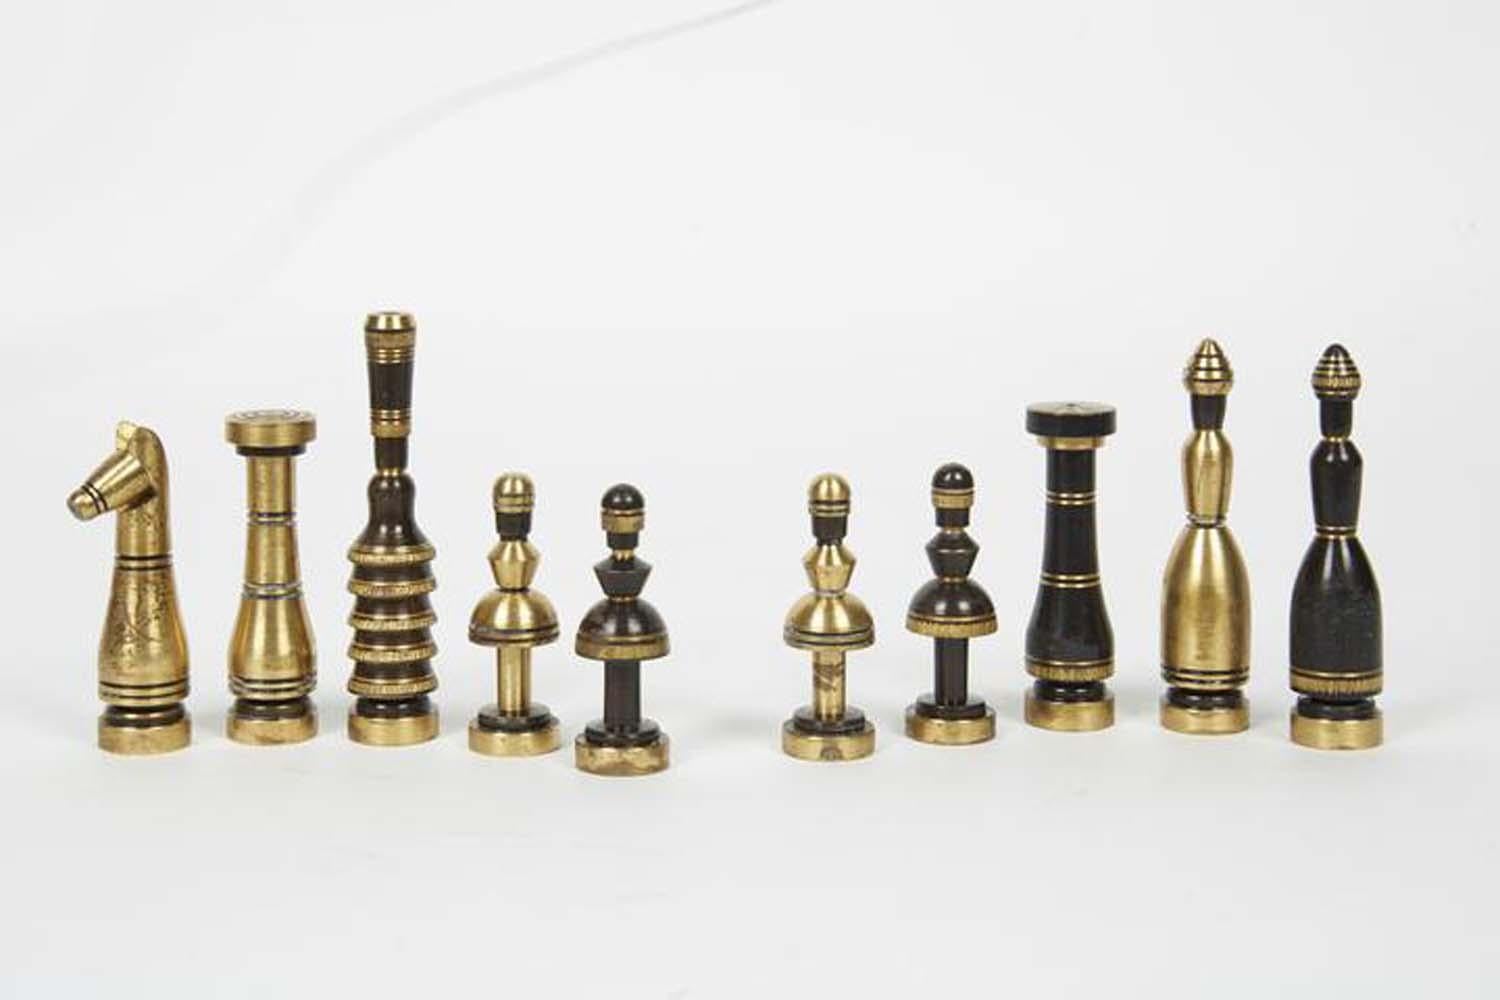 Chess set by Hans Teppich, Jerusalem, Israel, circa 1960.
32 pieces, cast brass and engraved, with Teppich characteristic design, placed in original wooden box with etched decorations.

Hans Teppich was born in Germany in 1904. After finishing